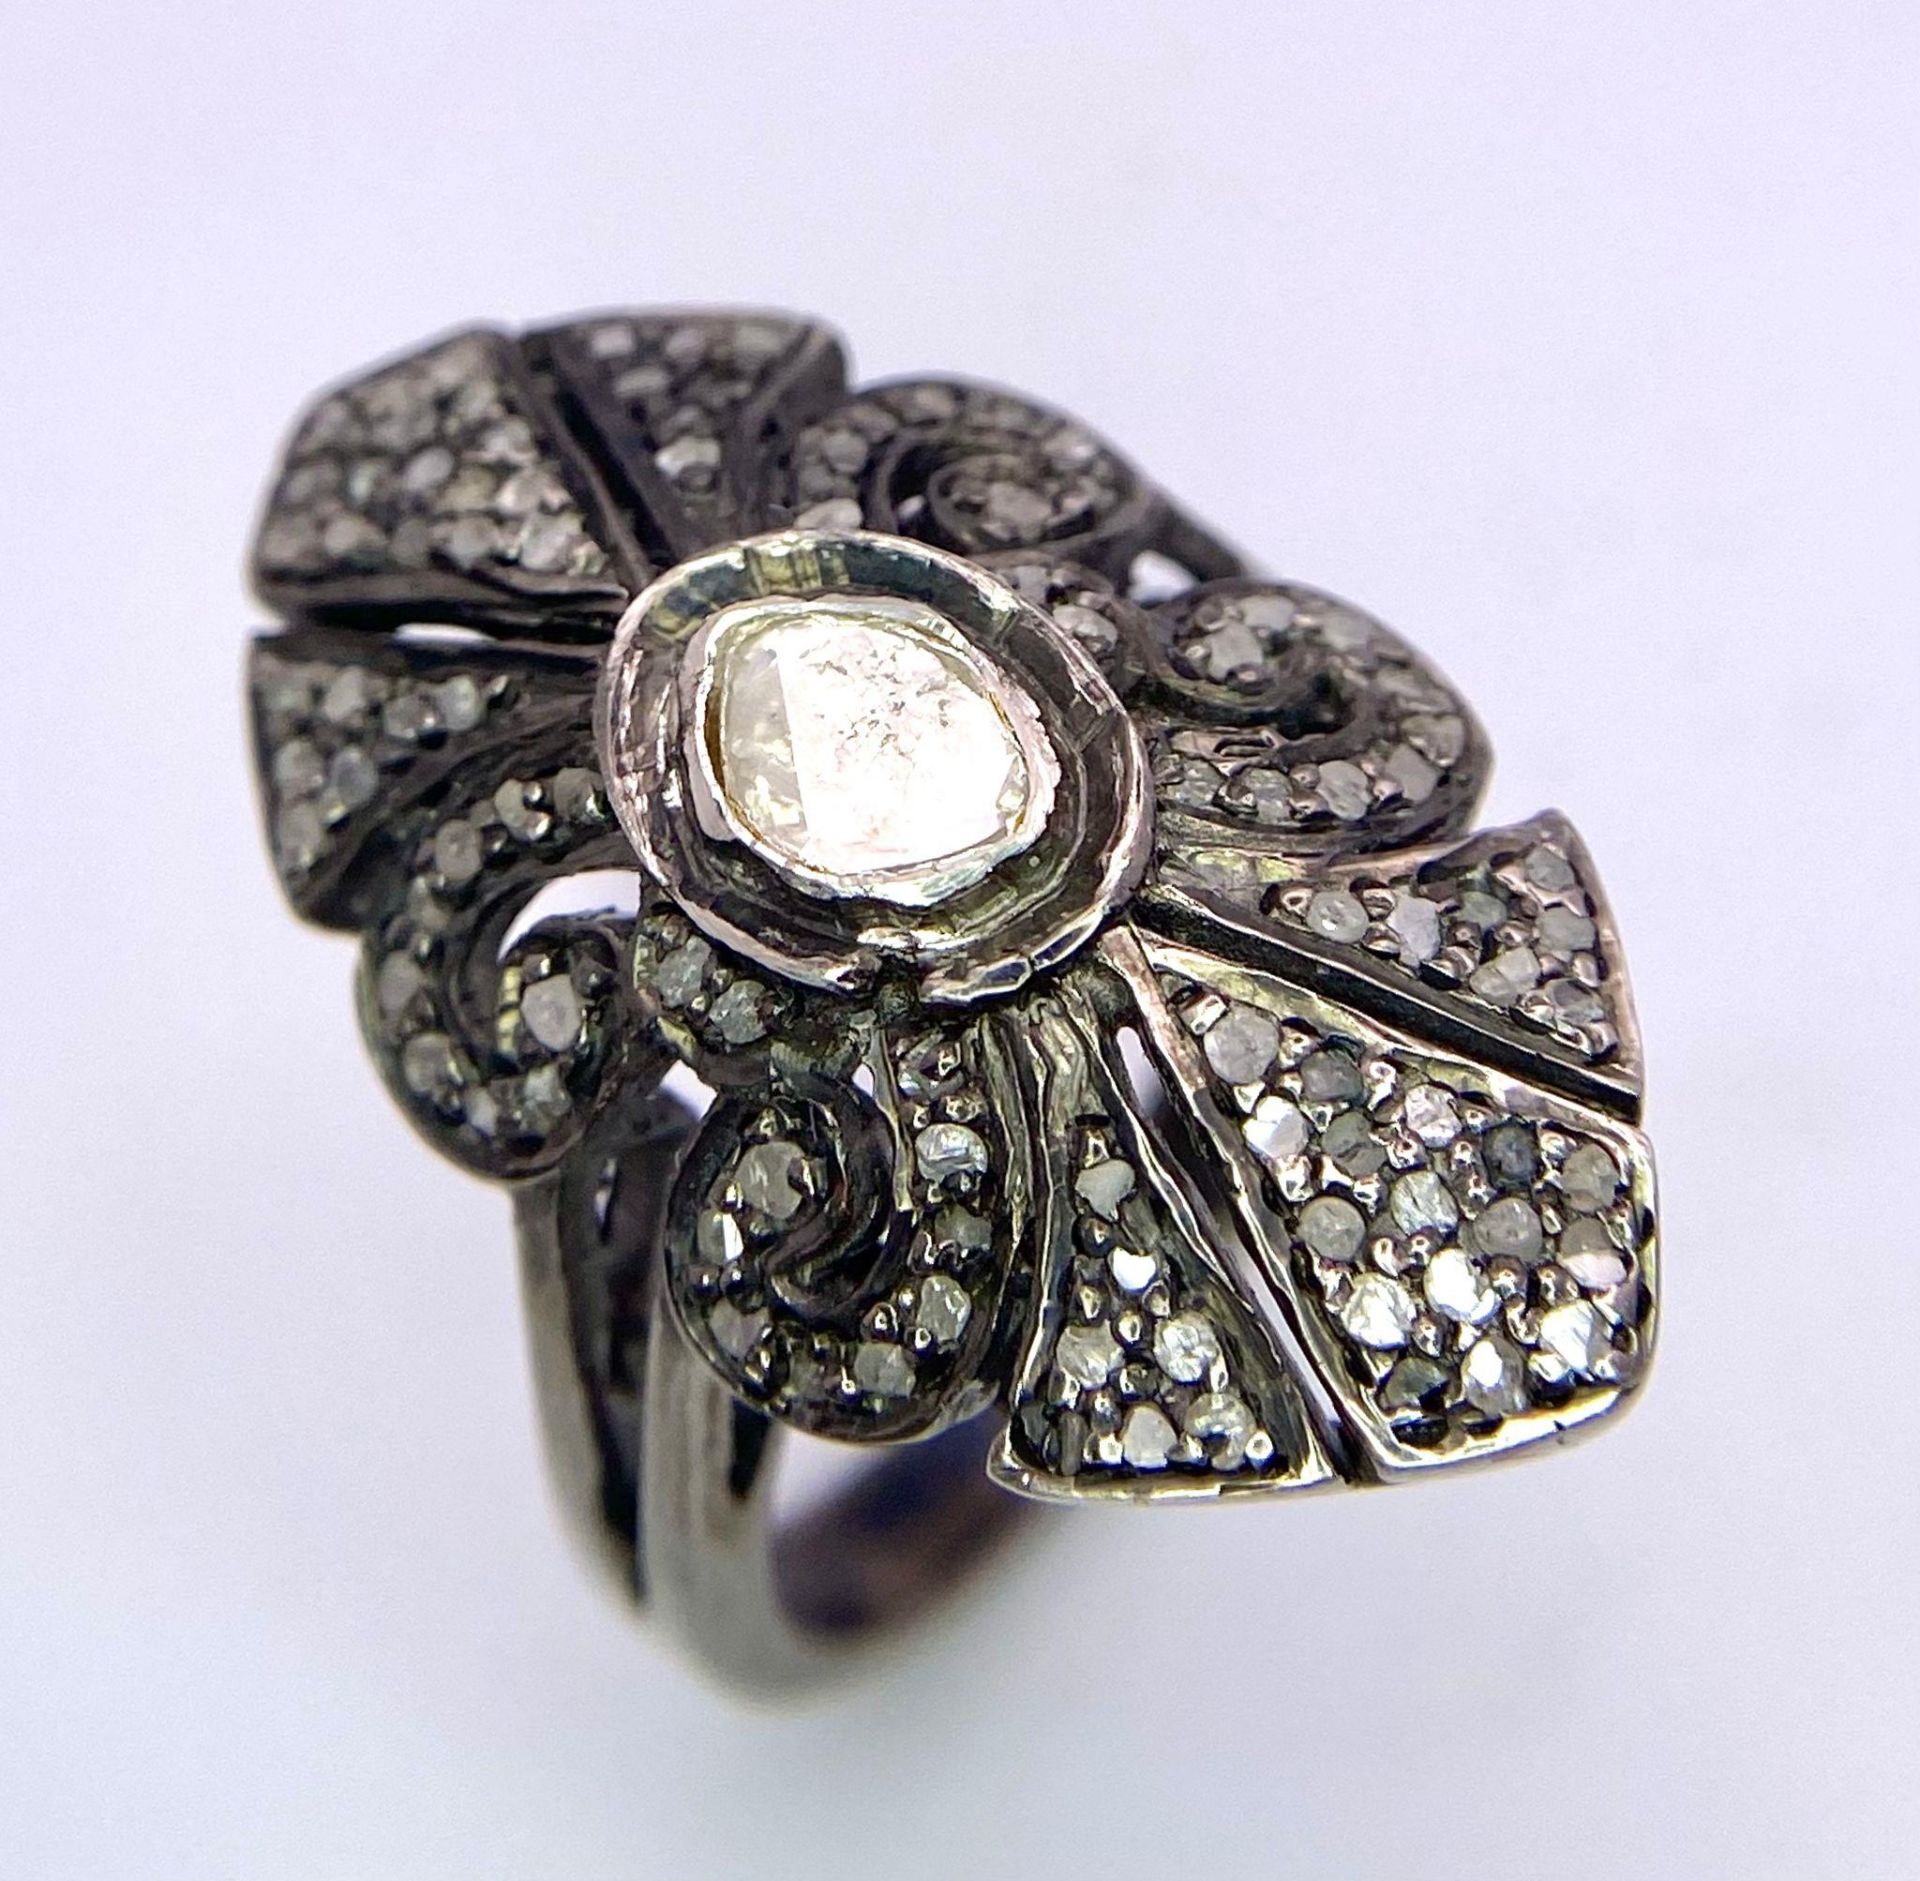 An Edwardian, ART NOUVEAU sterling silver ring with a large natural untreated diamond surrounded